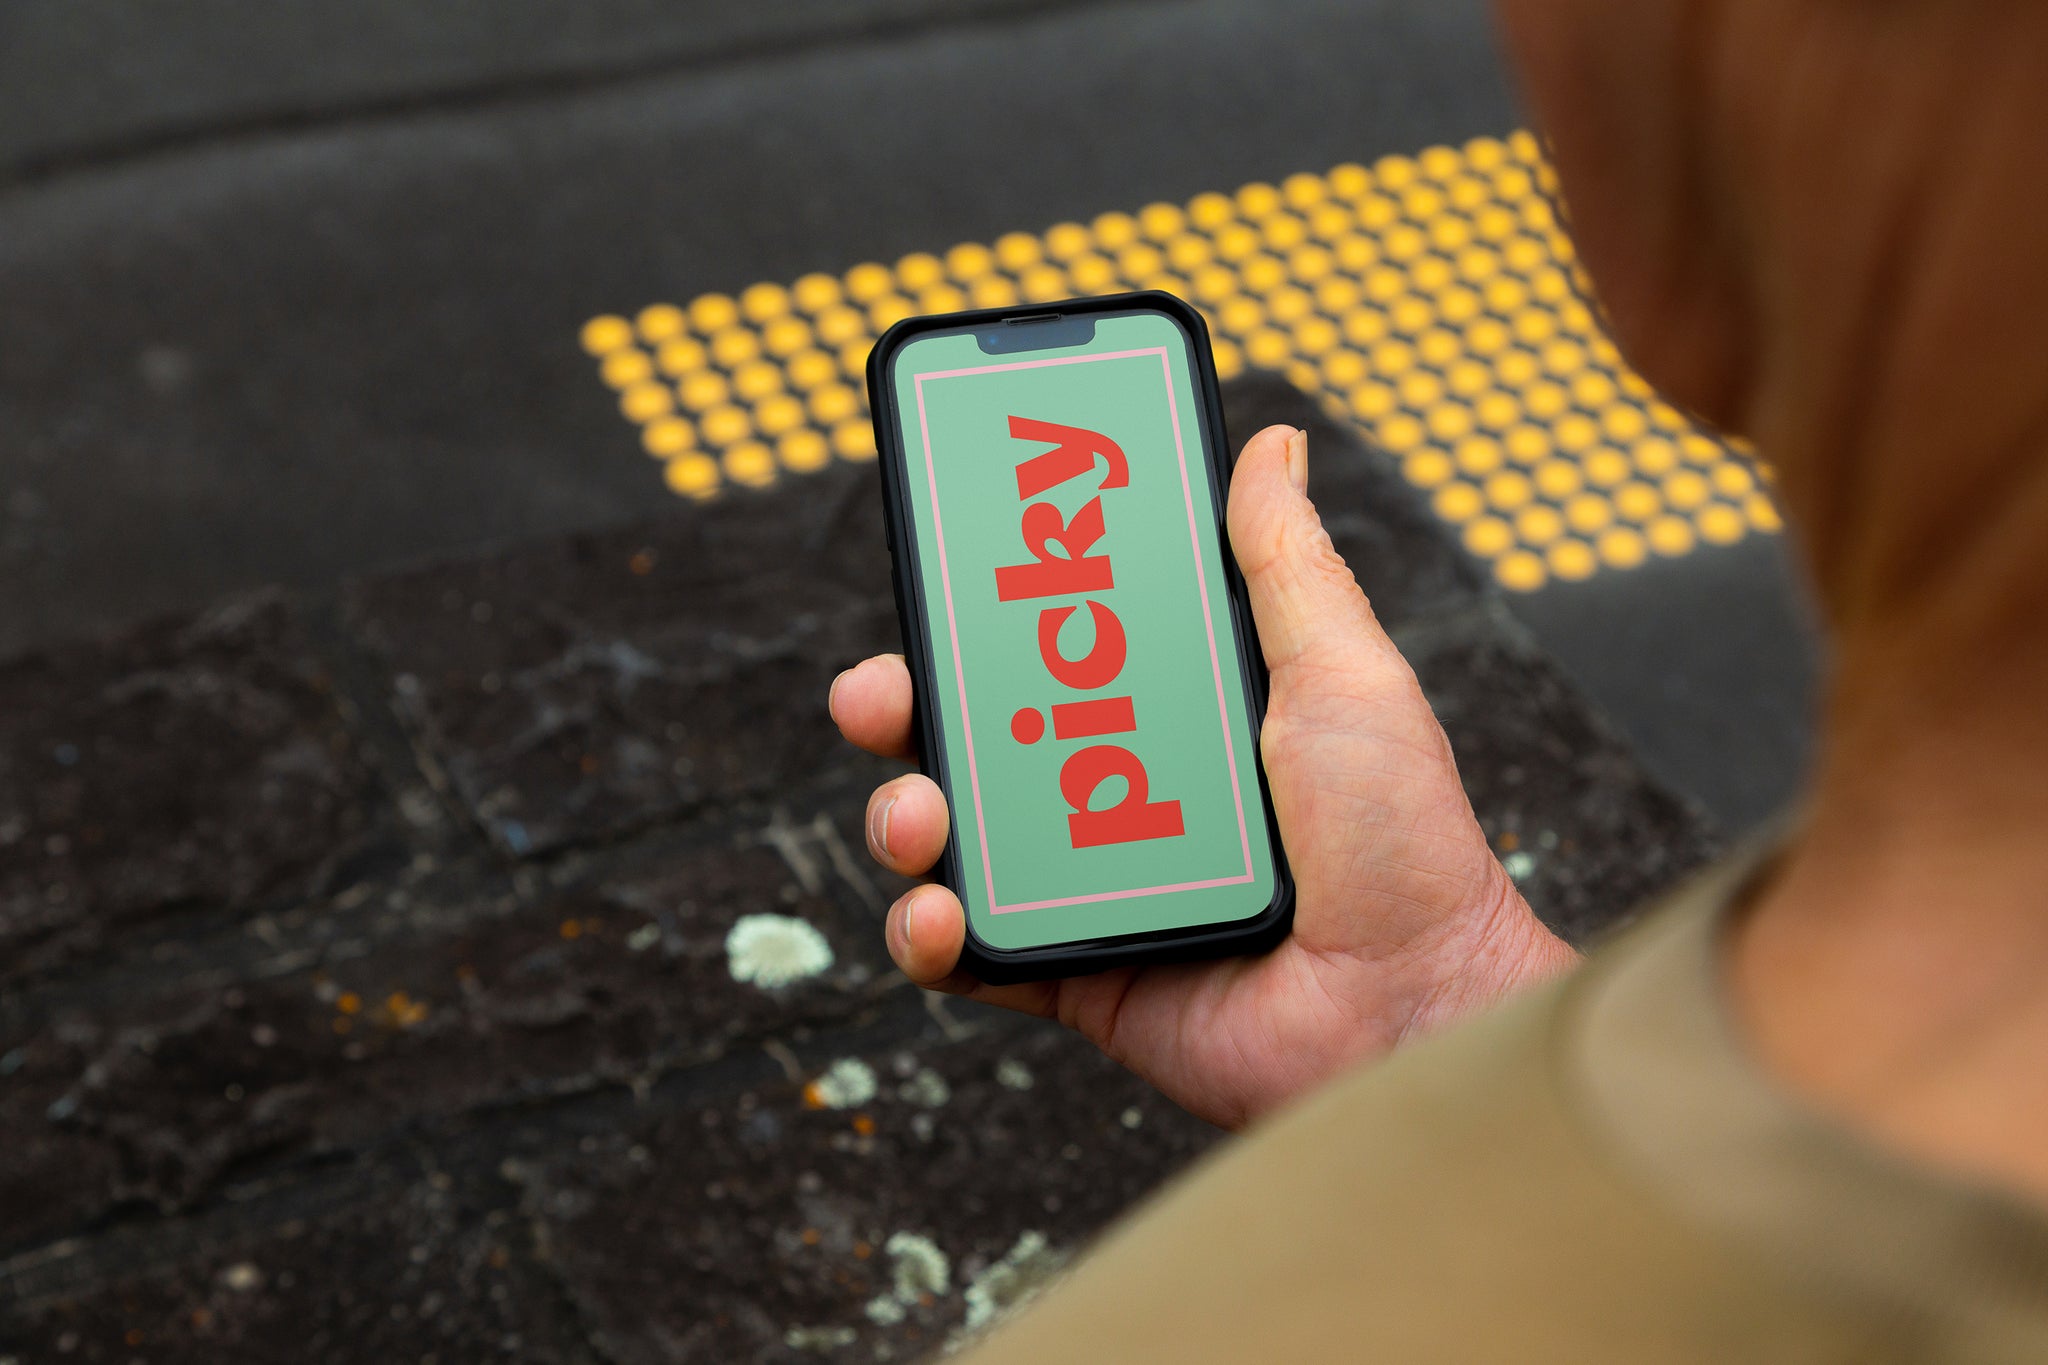 Man holding smart phone, iphone at traffic light crossing. Over the shoulder image with yellow crossing markers on the black concrete. Bright green screen with the words 'picky' written vertically in red. 